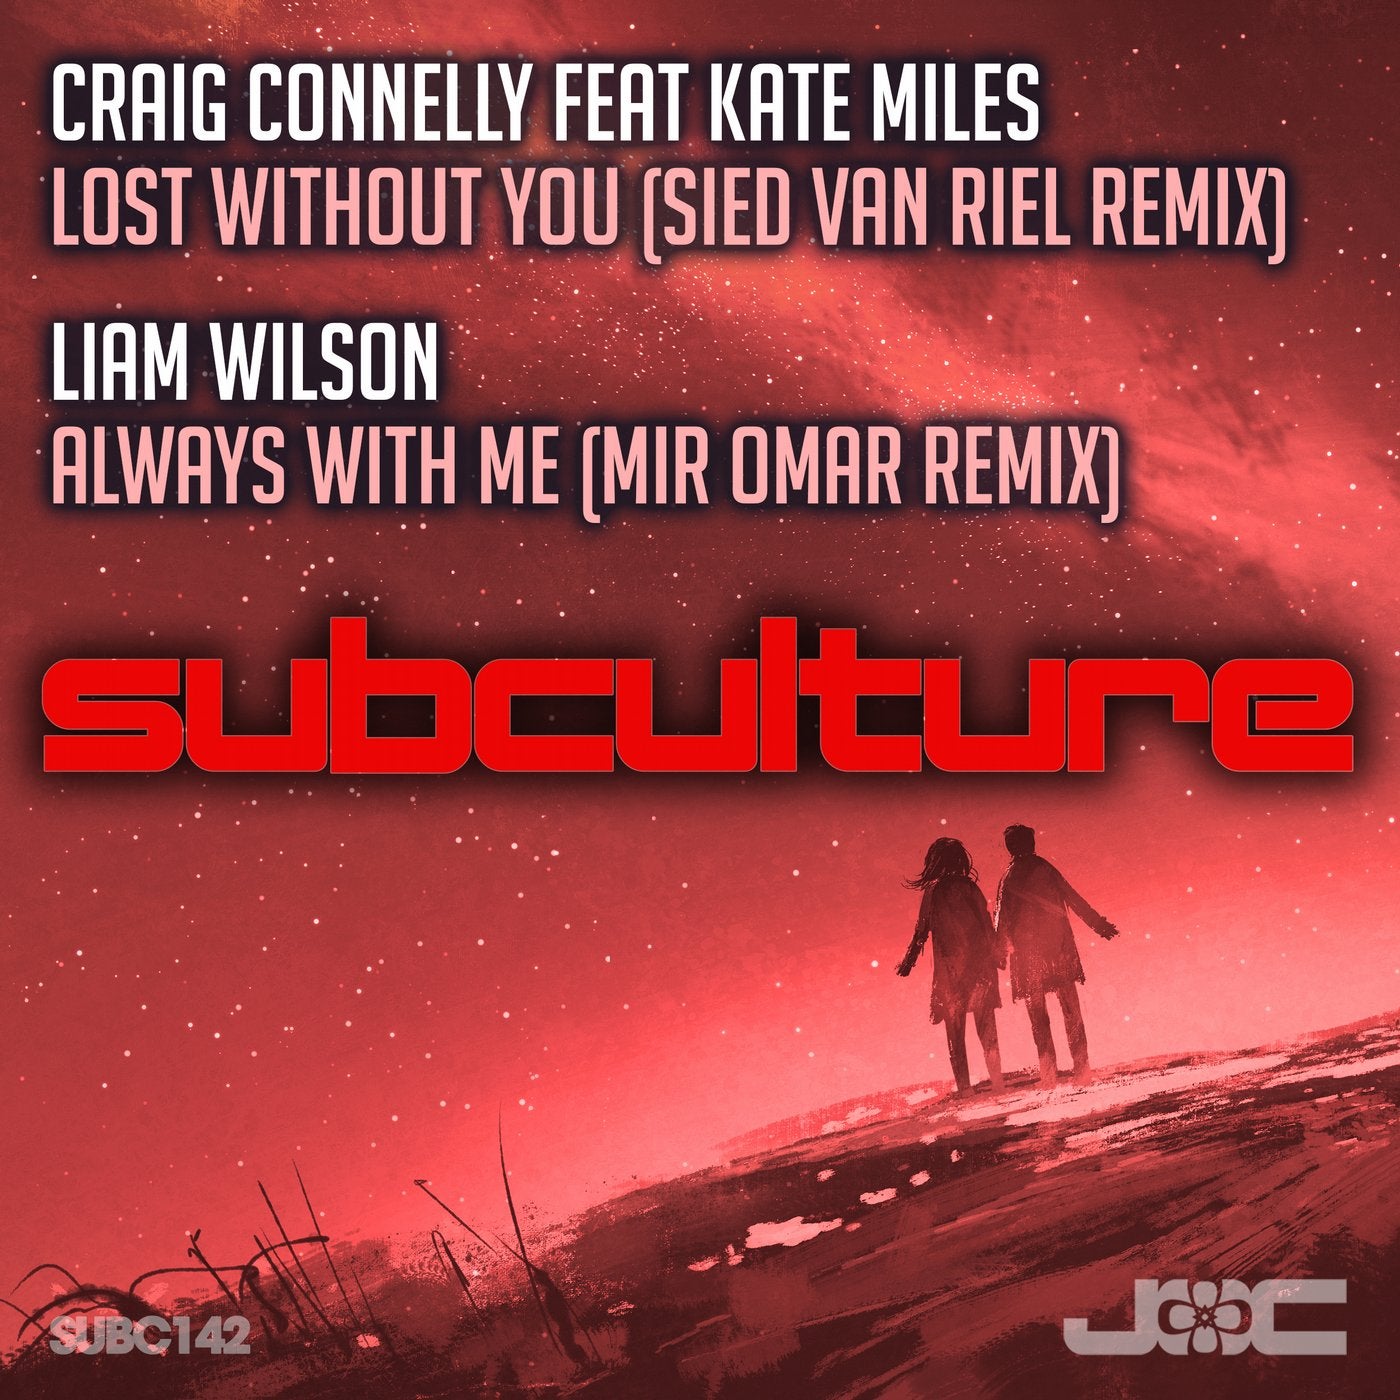 Craig Connelly. Кейт Майлз. Liam Wilson DJ. Craig Connelly featuring Kate Miles — Lost without you(Extended Mix. Miles lost